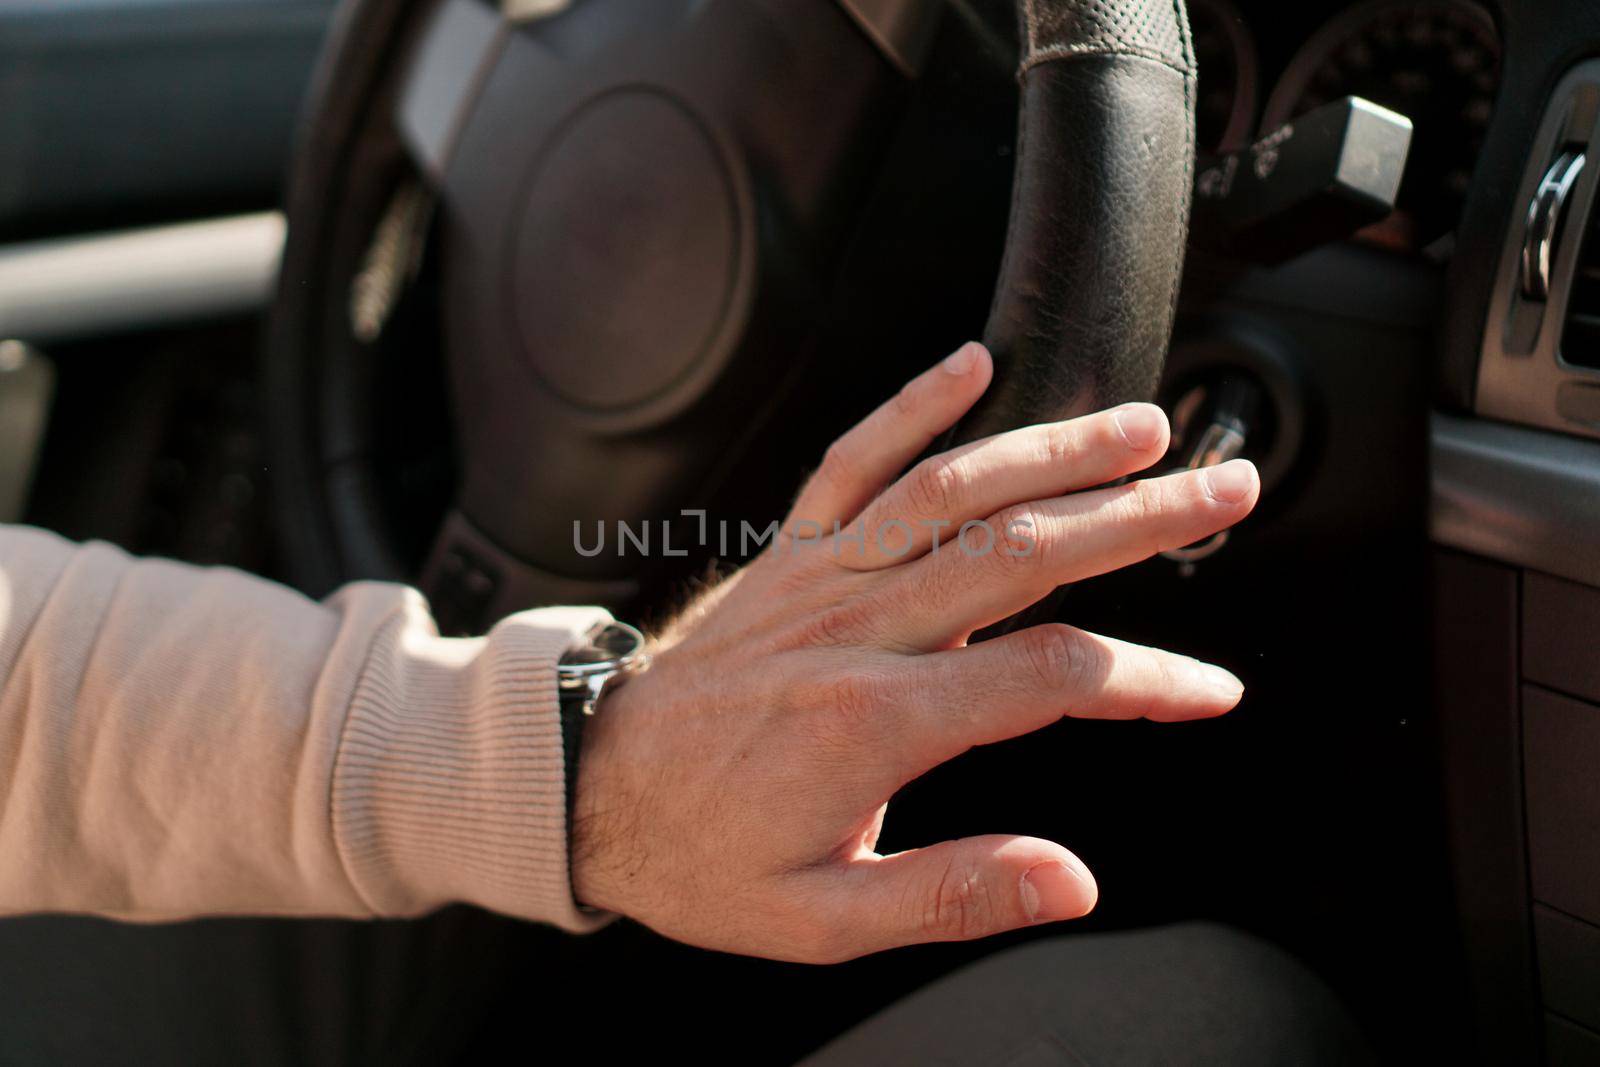 A man's hand on a steering wheel. Shabby steering wheel trim in a car. Watch on hand